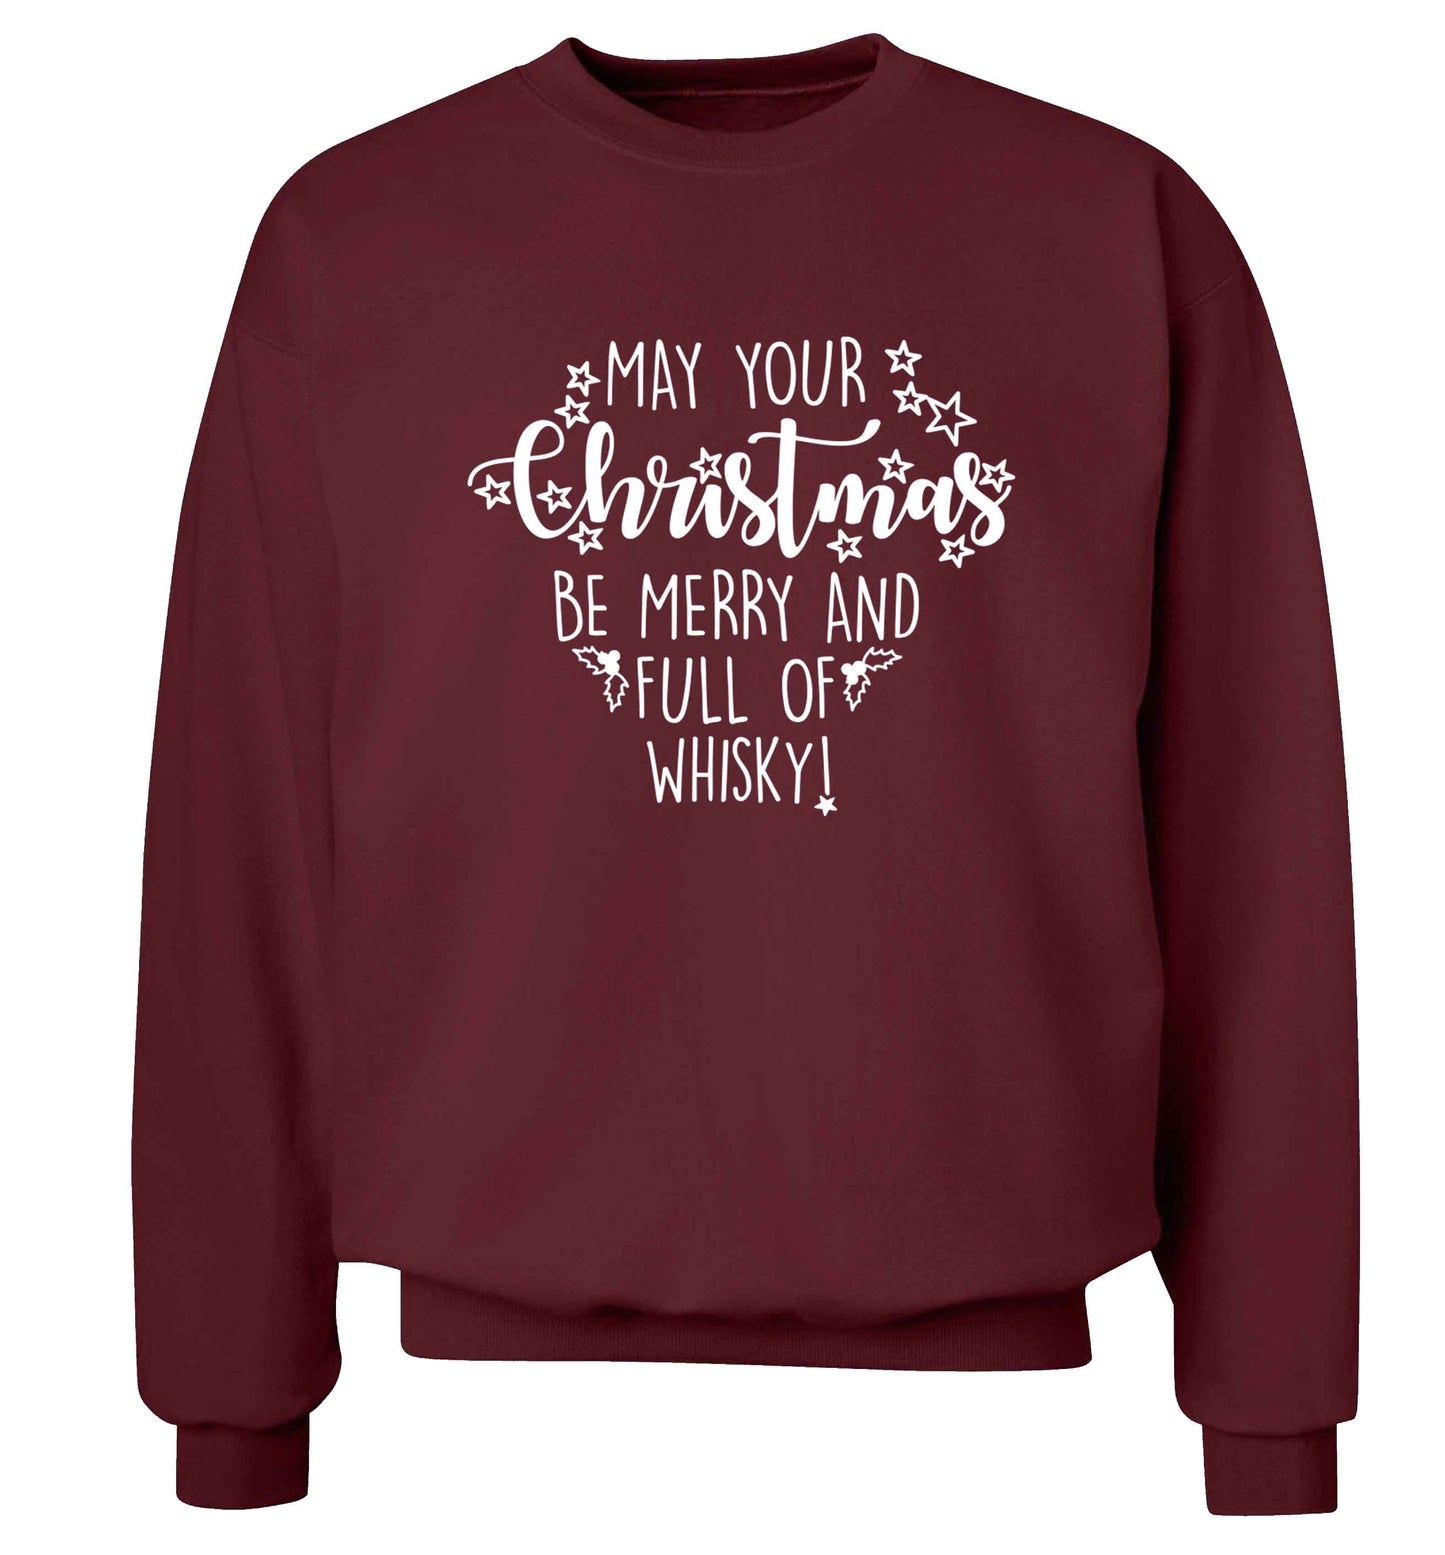 May your Christmas be merry and full of whisky Adult's unisex maroon Sweater 2XL